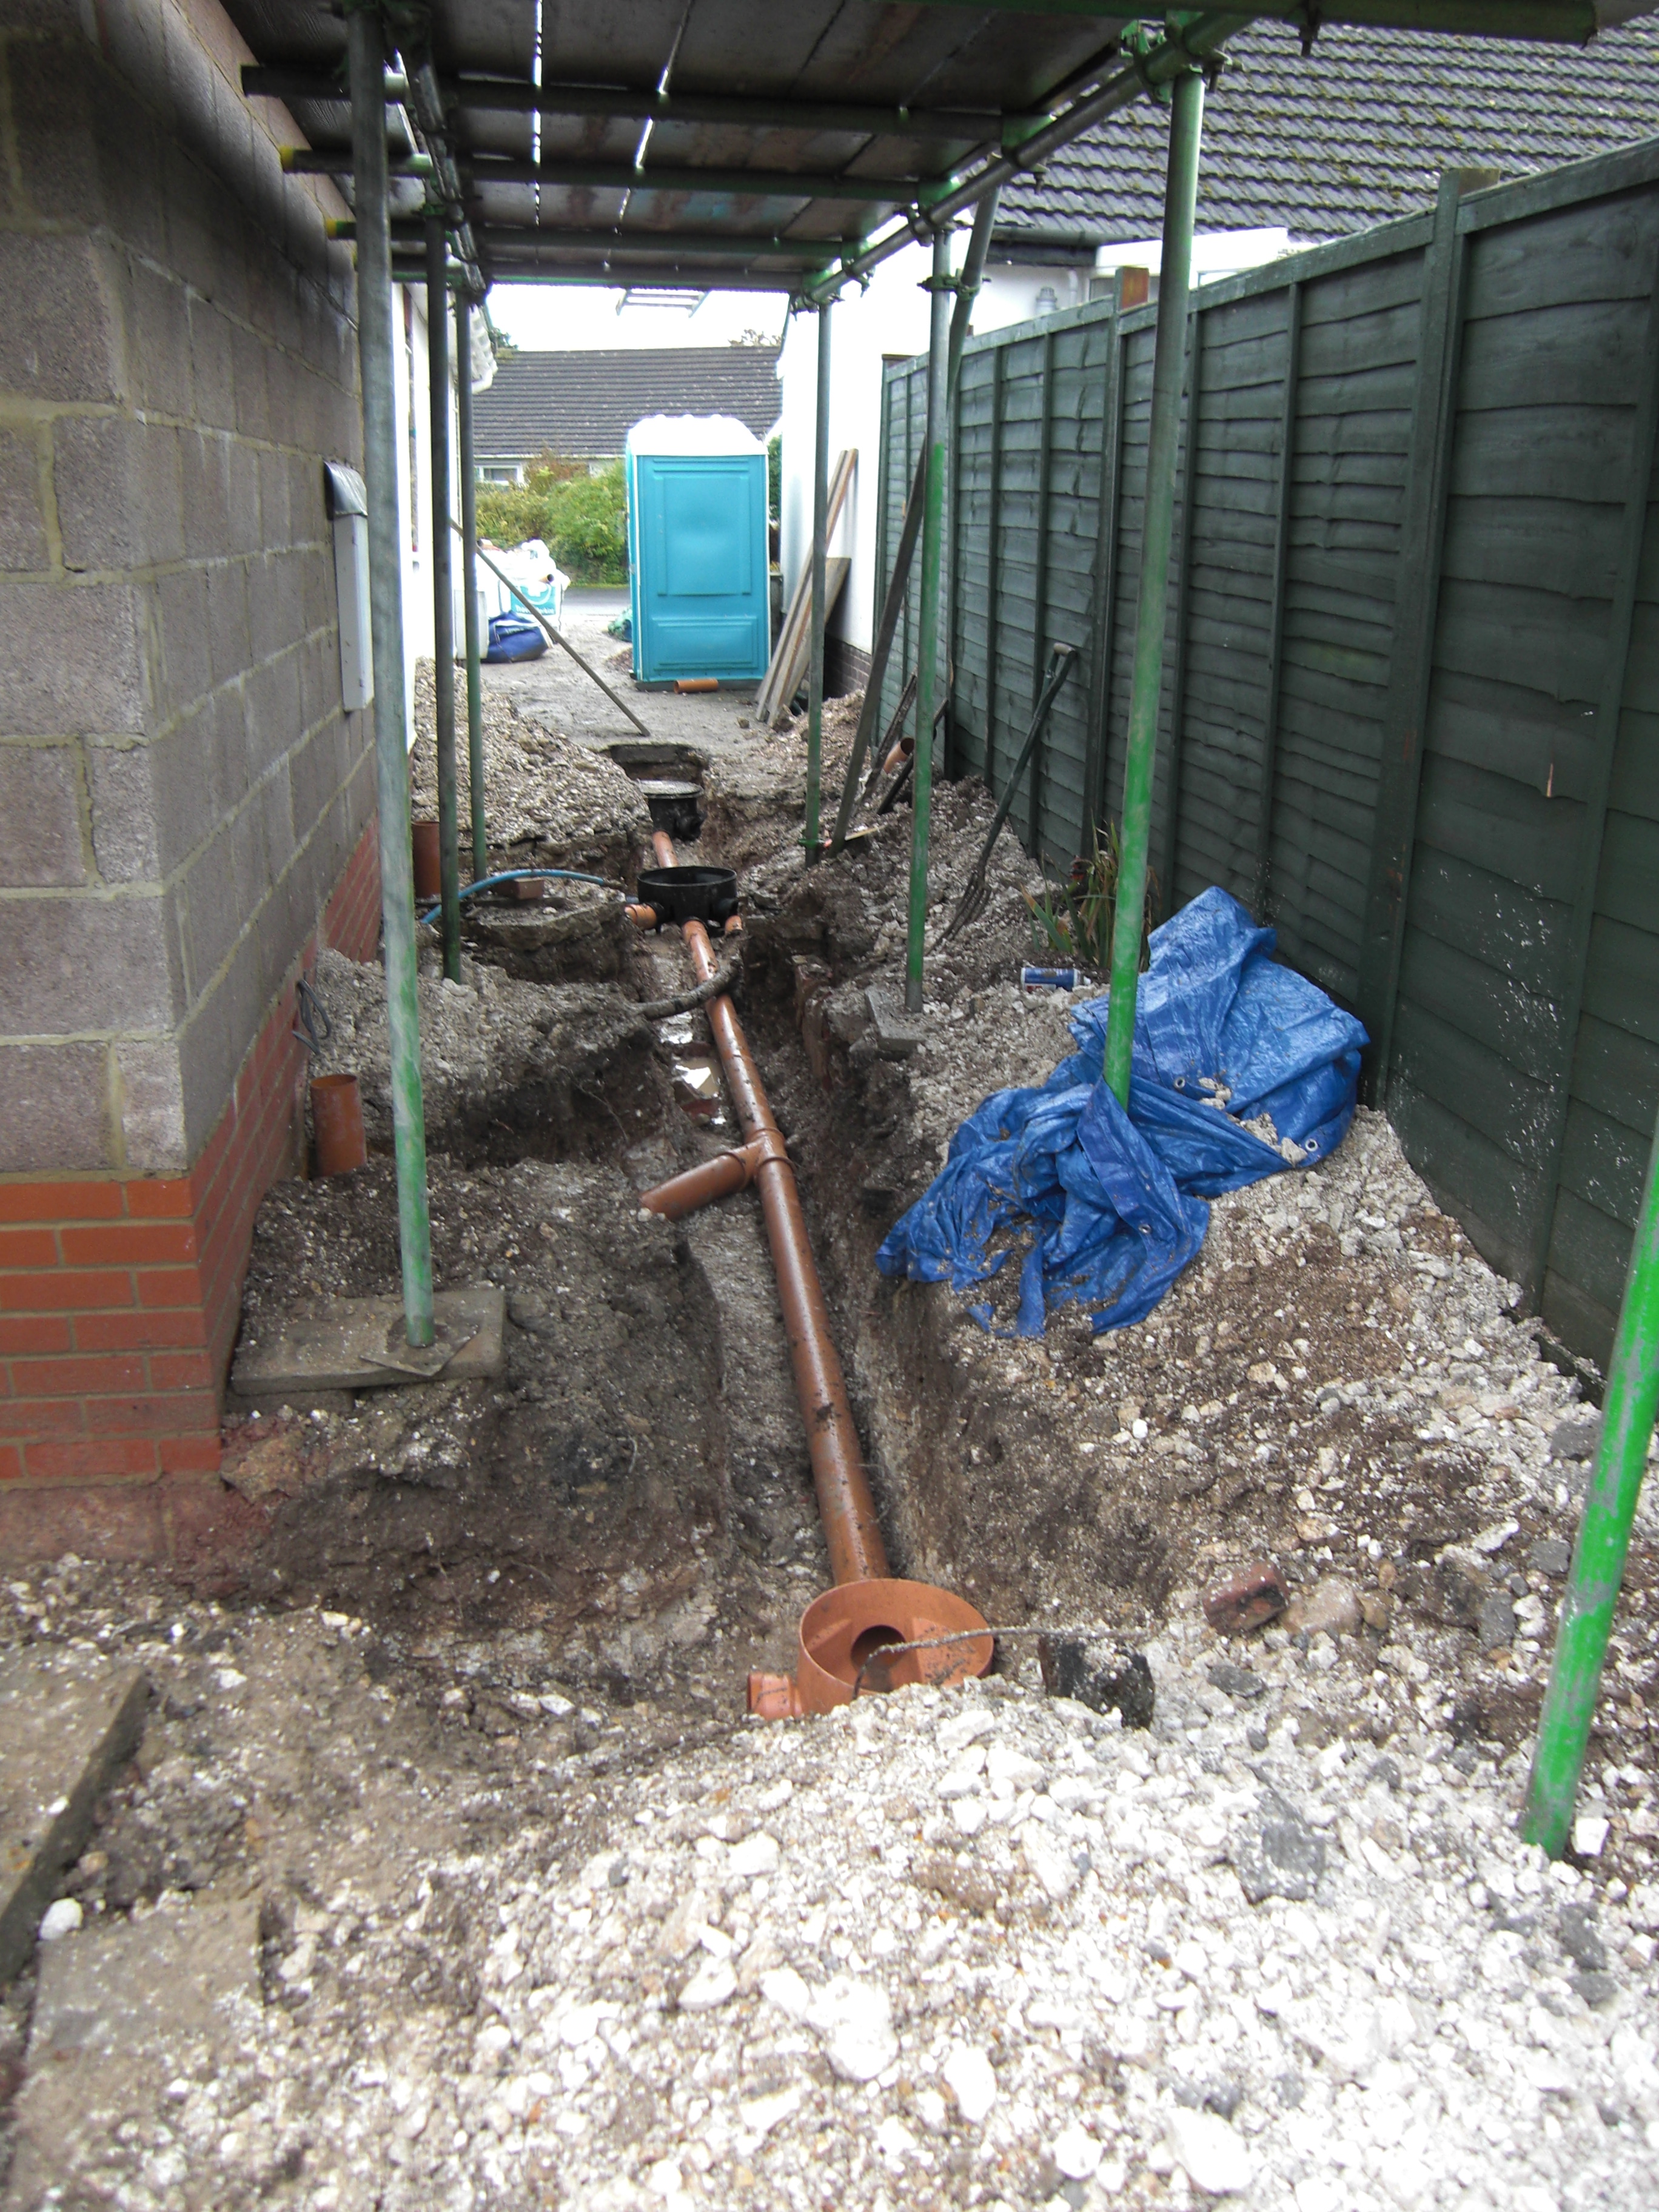 Beacon Cl during drainage works